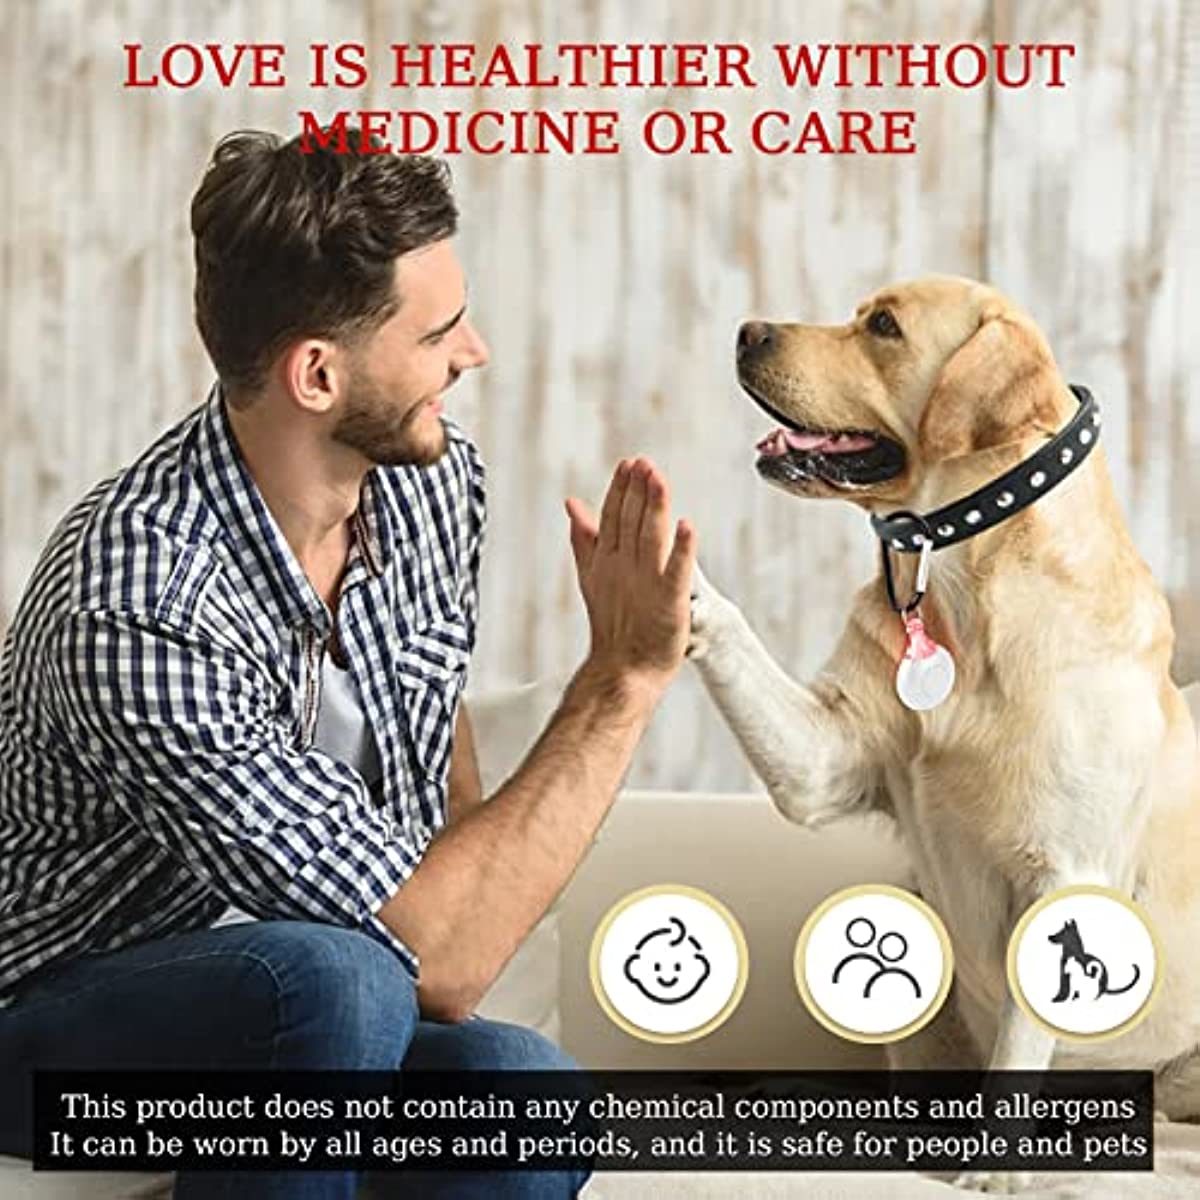 Ultrasonic; Natural; Chemical-Free Tick and Flea Repeller - Flea and Tick Treatment for Dogs; 2 pack; Ultrasonic Flea and Tick Repeller for Dogs and Cats